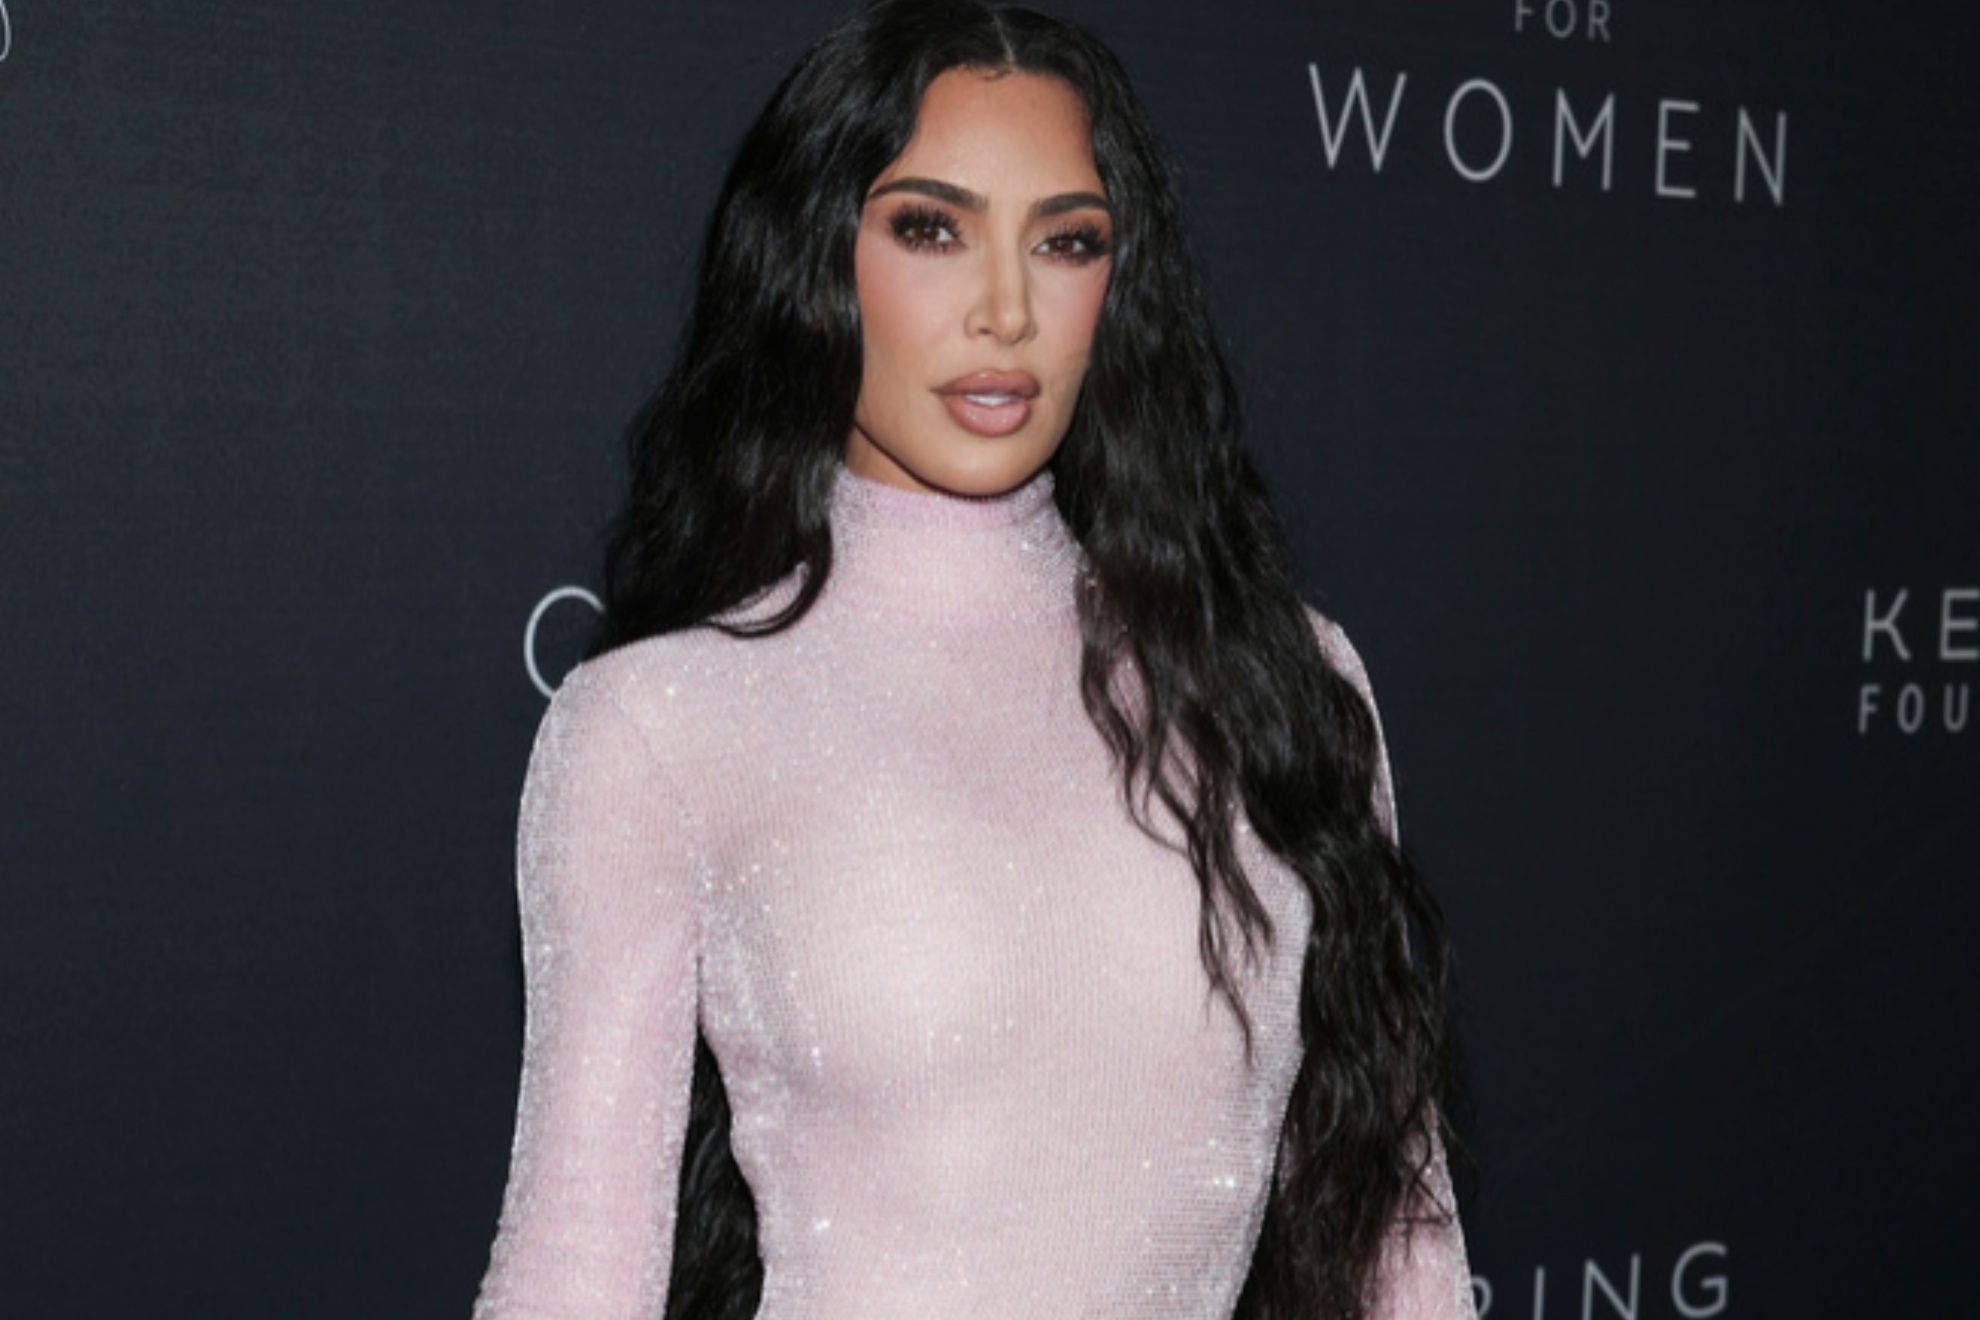 Kim Kardashian was named one of the 100 Most Powerful Women by Fortune magazine